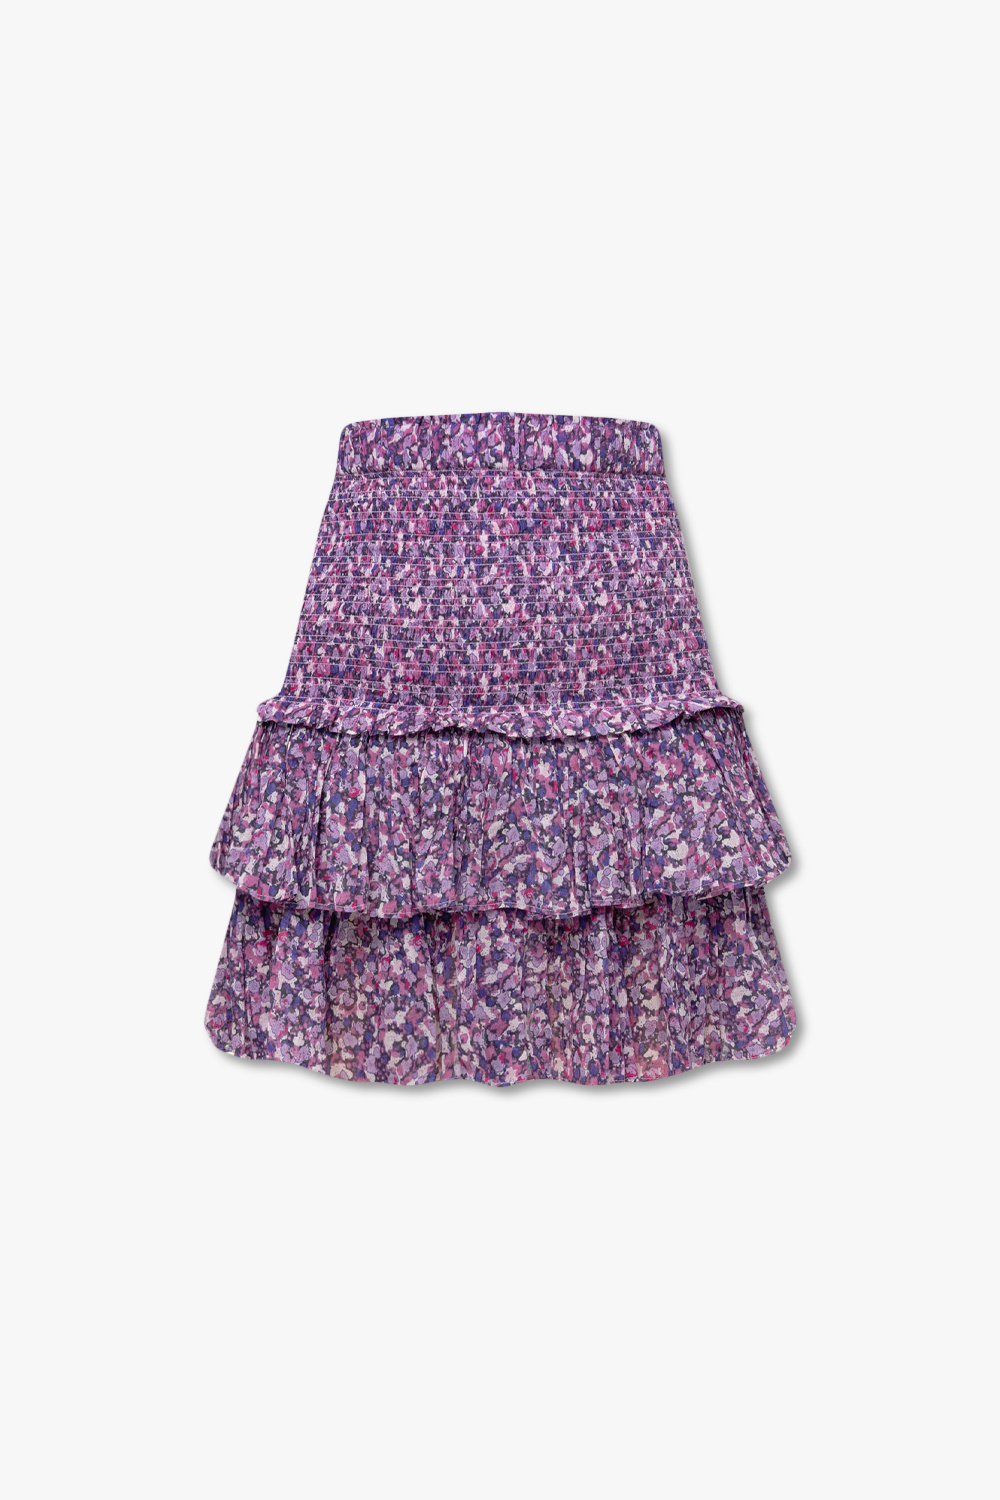 The hottest trend ‘Naomi’ patterned skirt